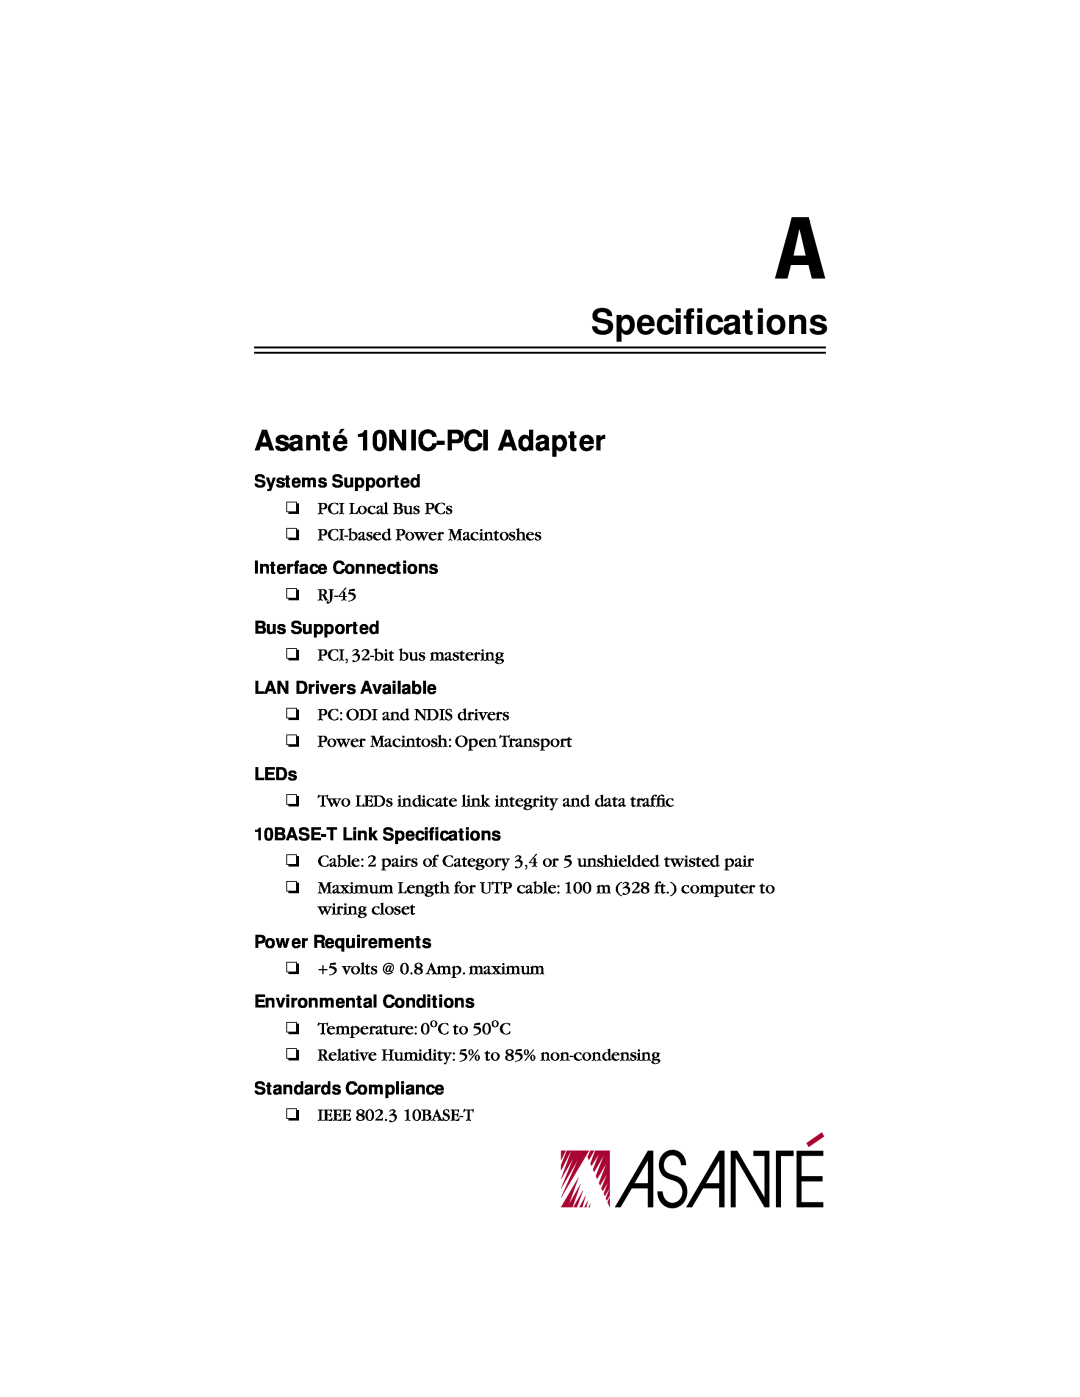 Asante Technologies 10NIC-PCITM Speciﬁcations, Asanté 10NIC-PCI Adapter, Systems Supported, Interface Connections, LEDs 